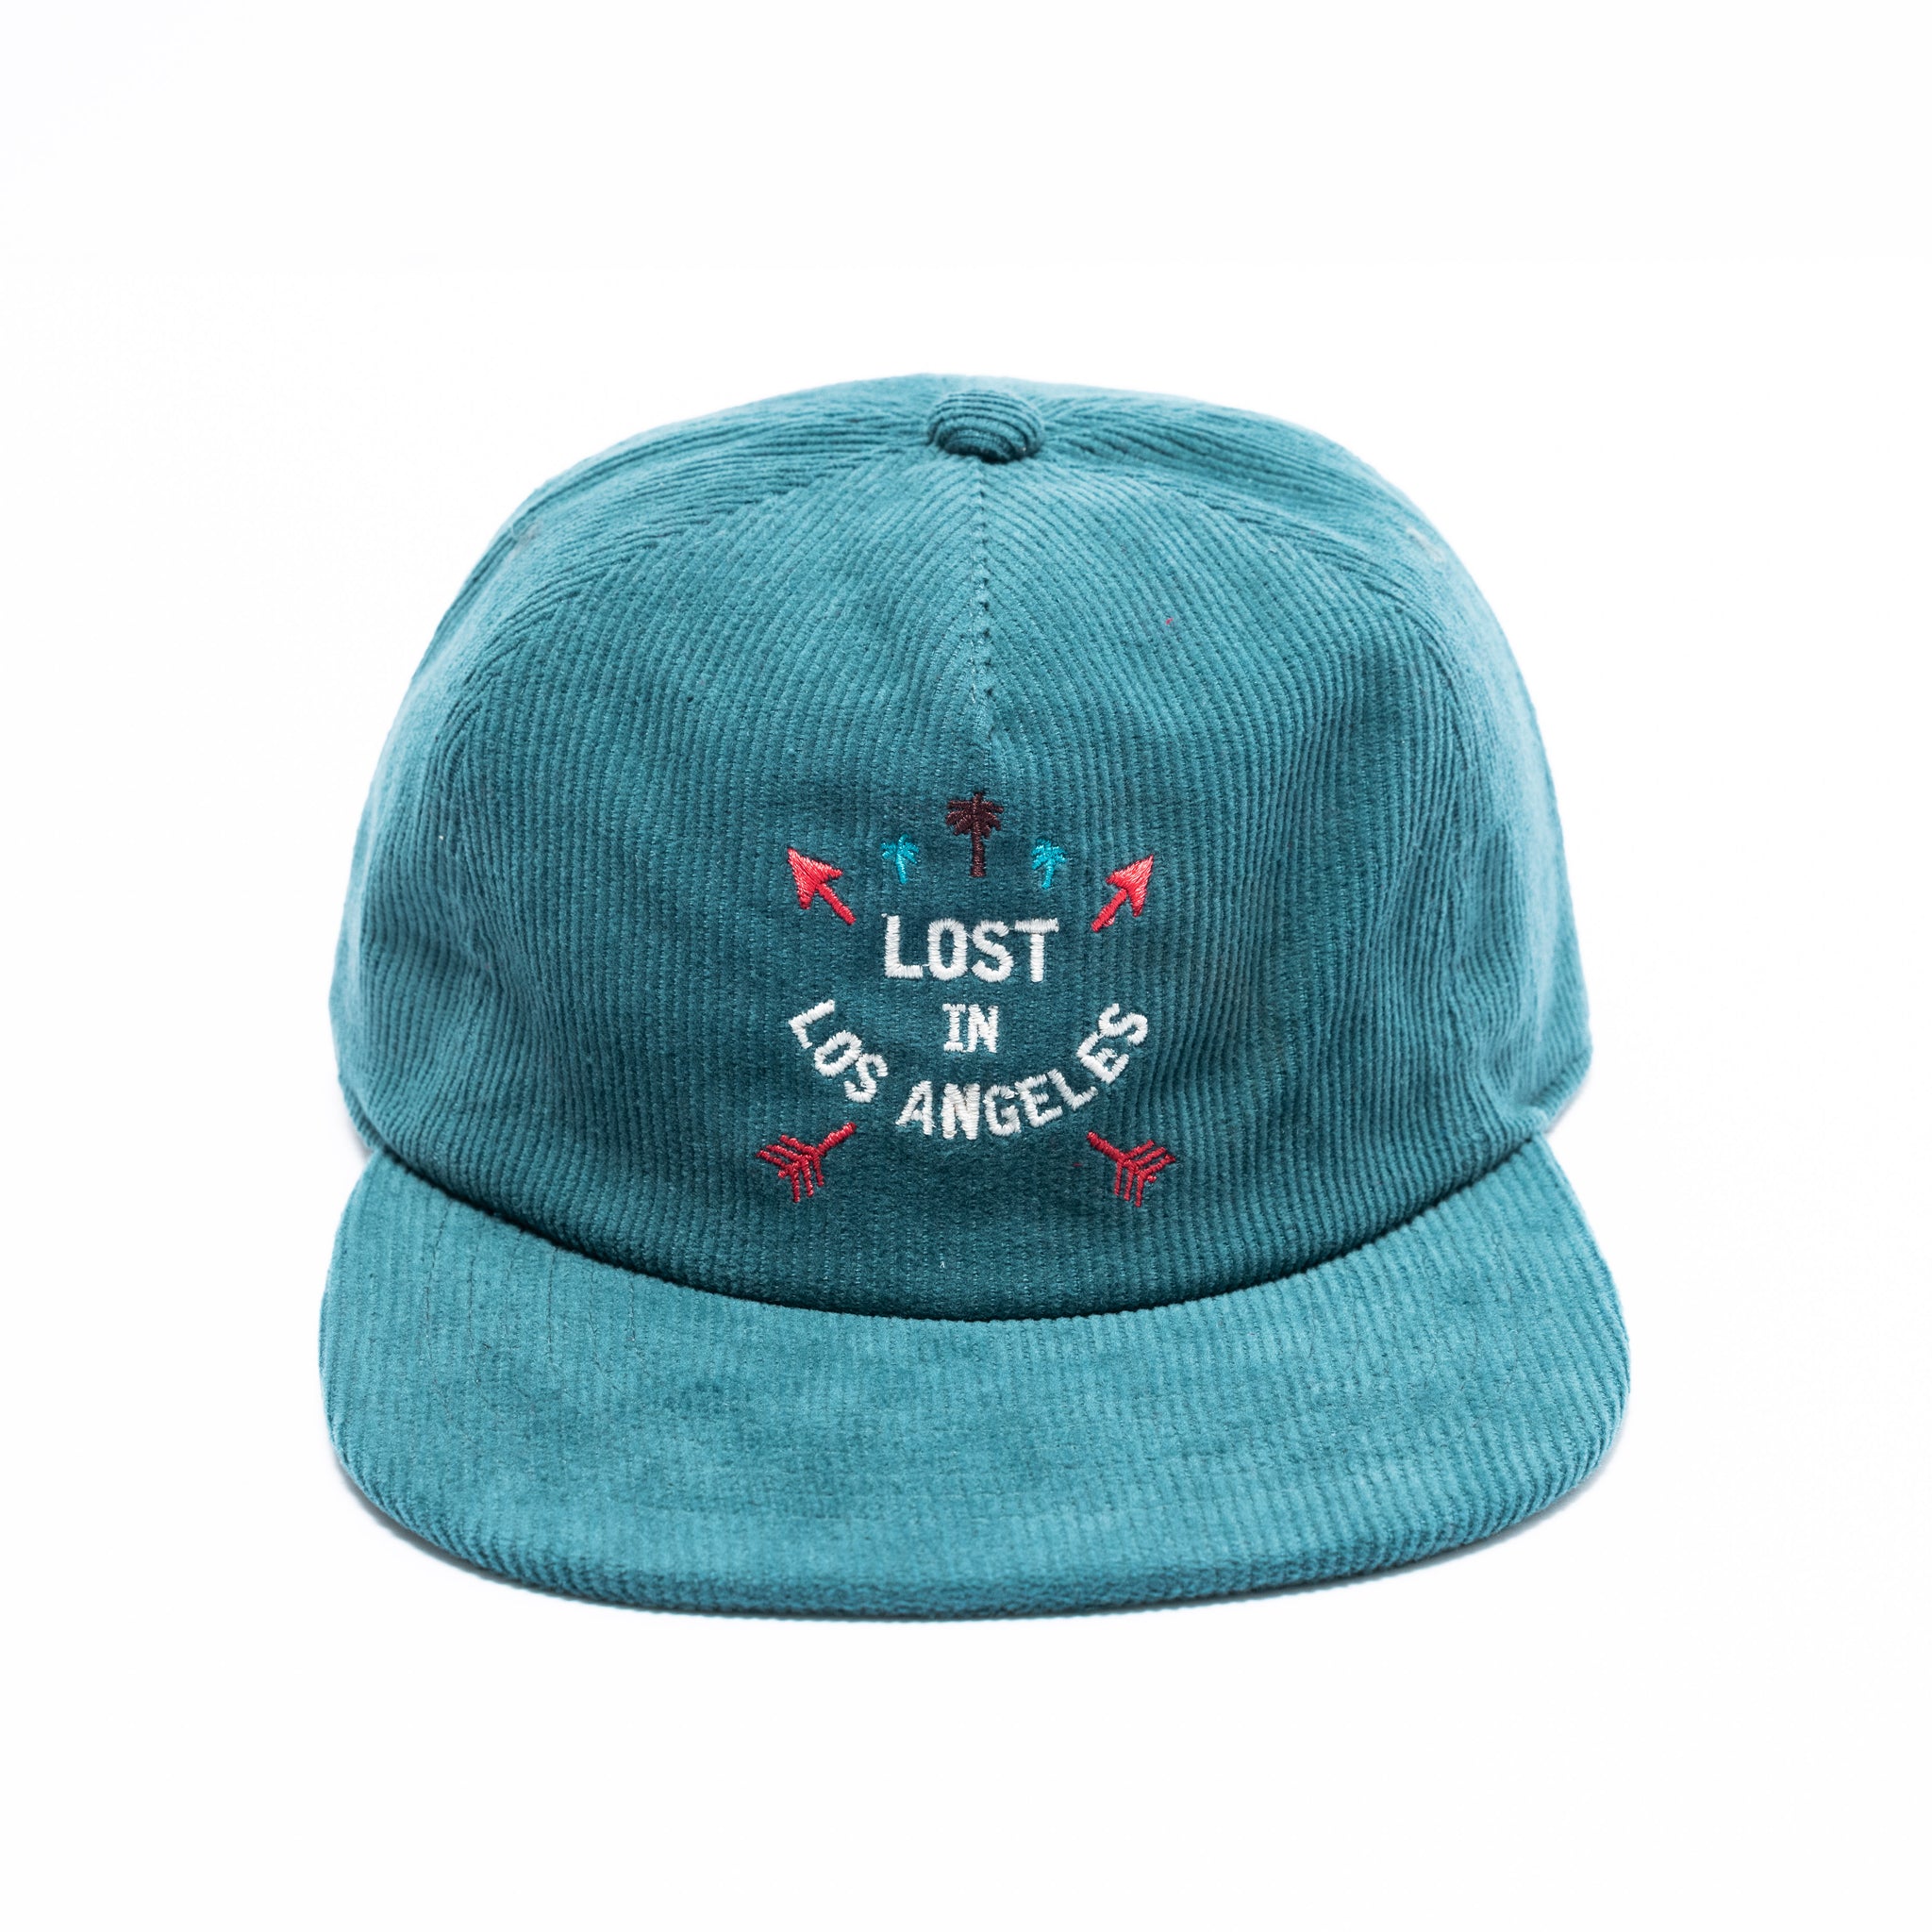 Lost in Los Angeles 5panel